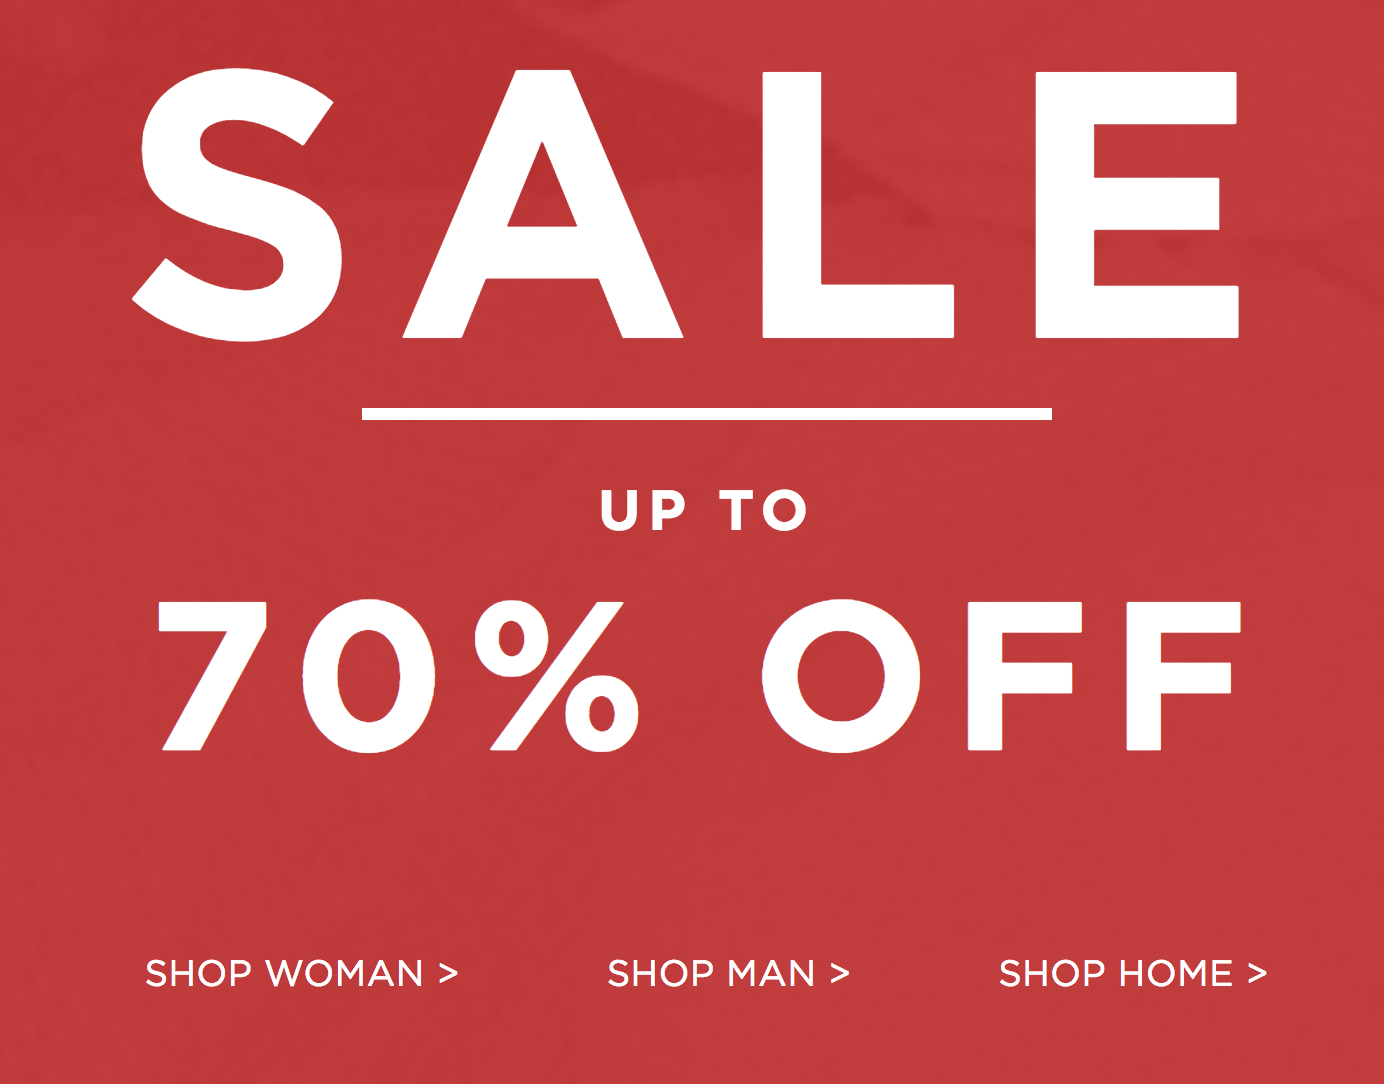 French Connection French Connection: Sale up to 70% off women's and men's clothes and homeware items